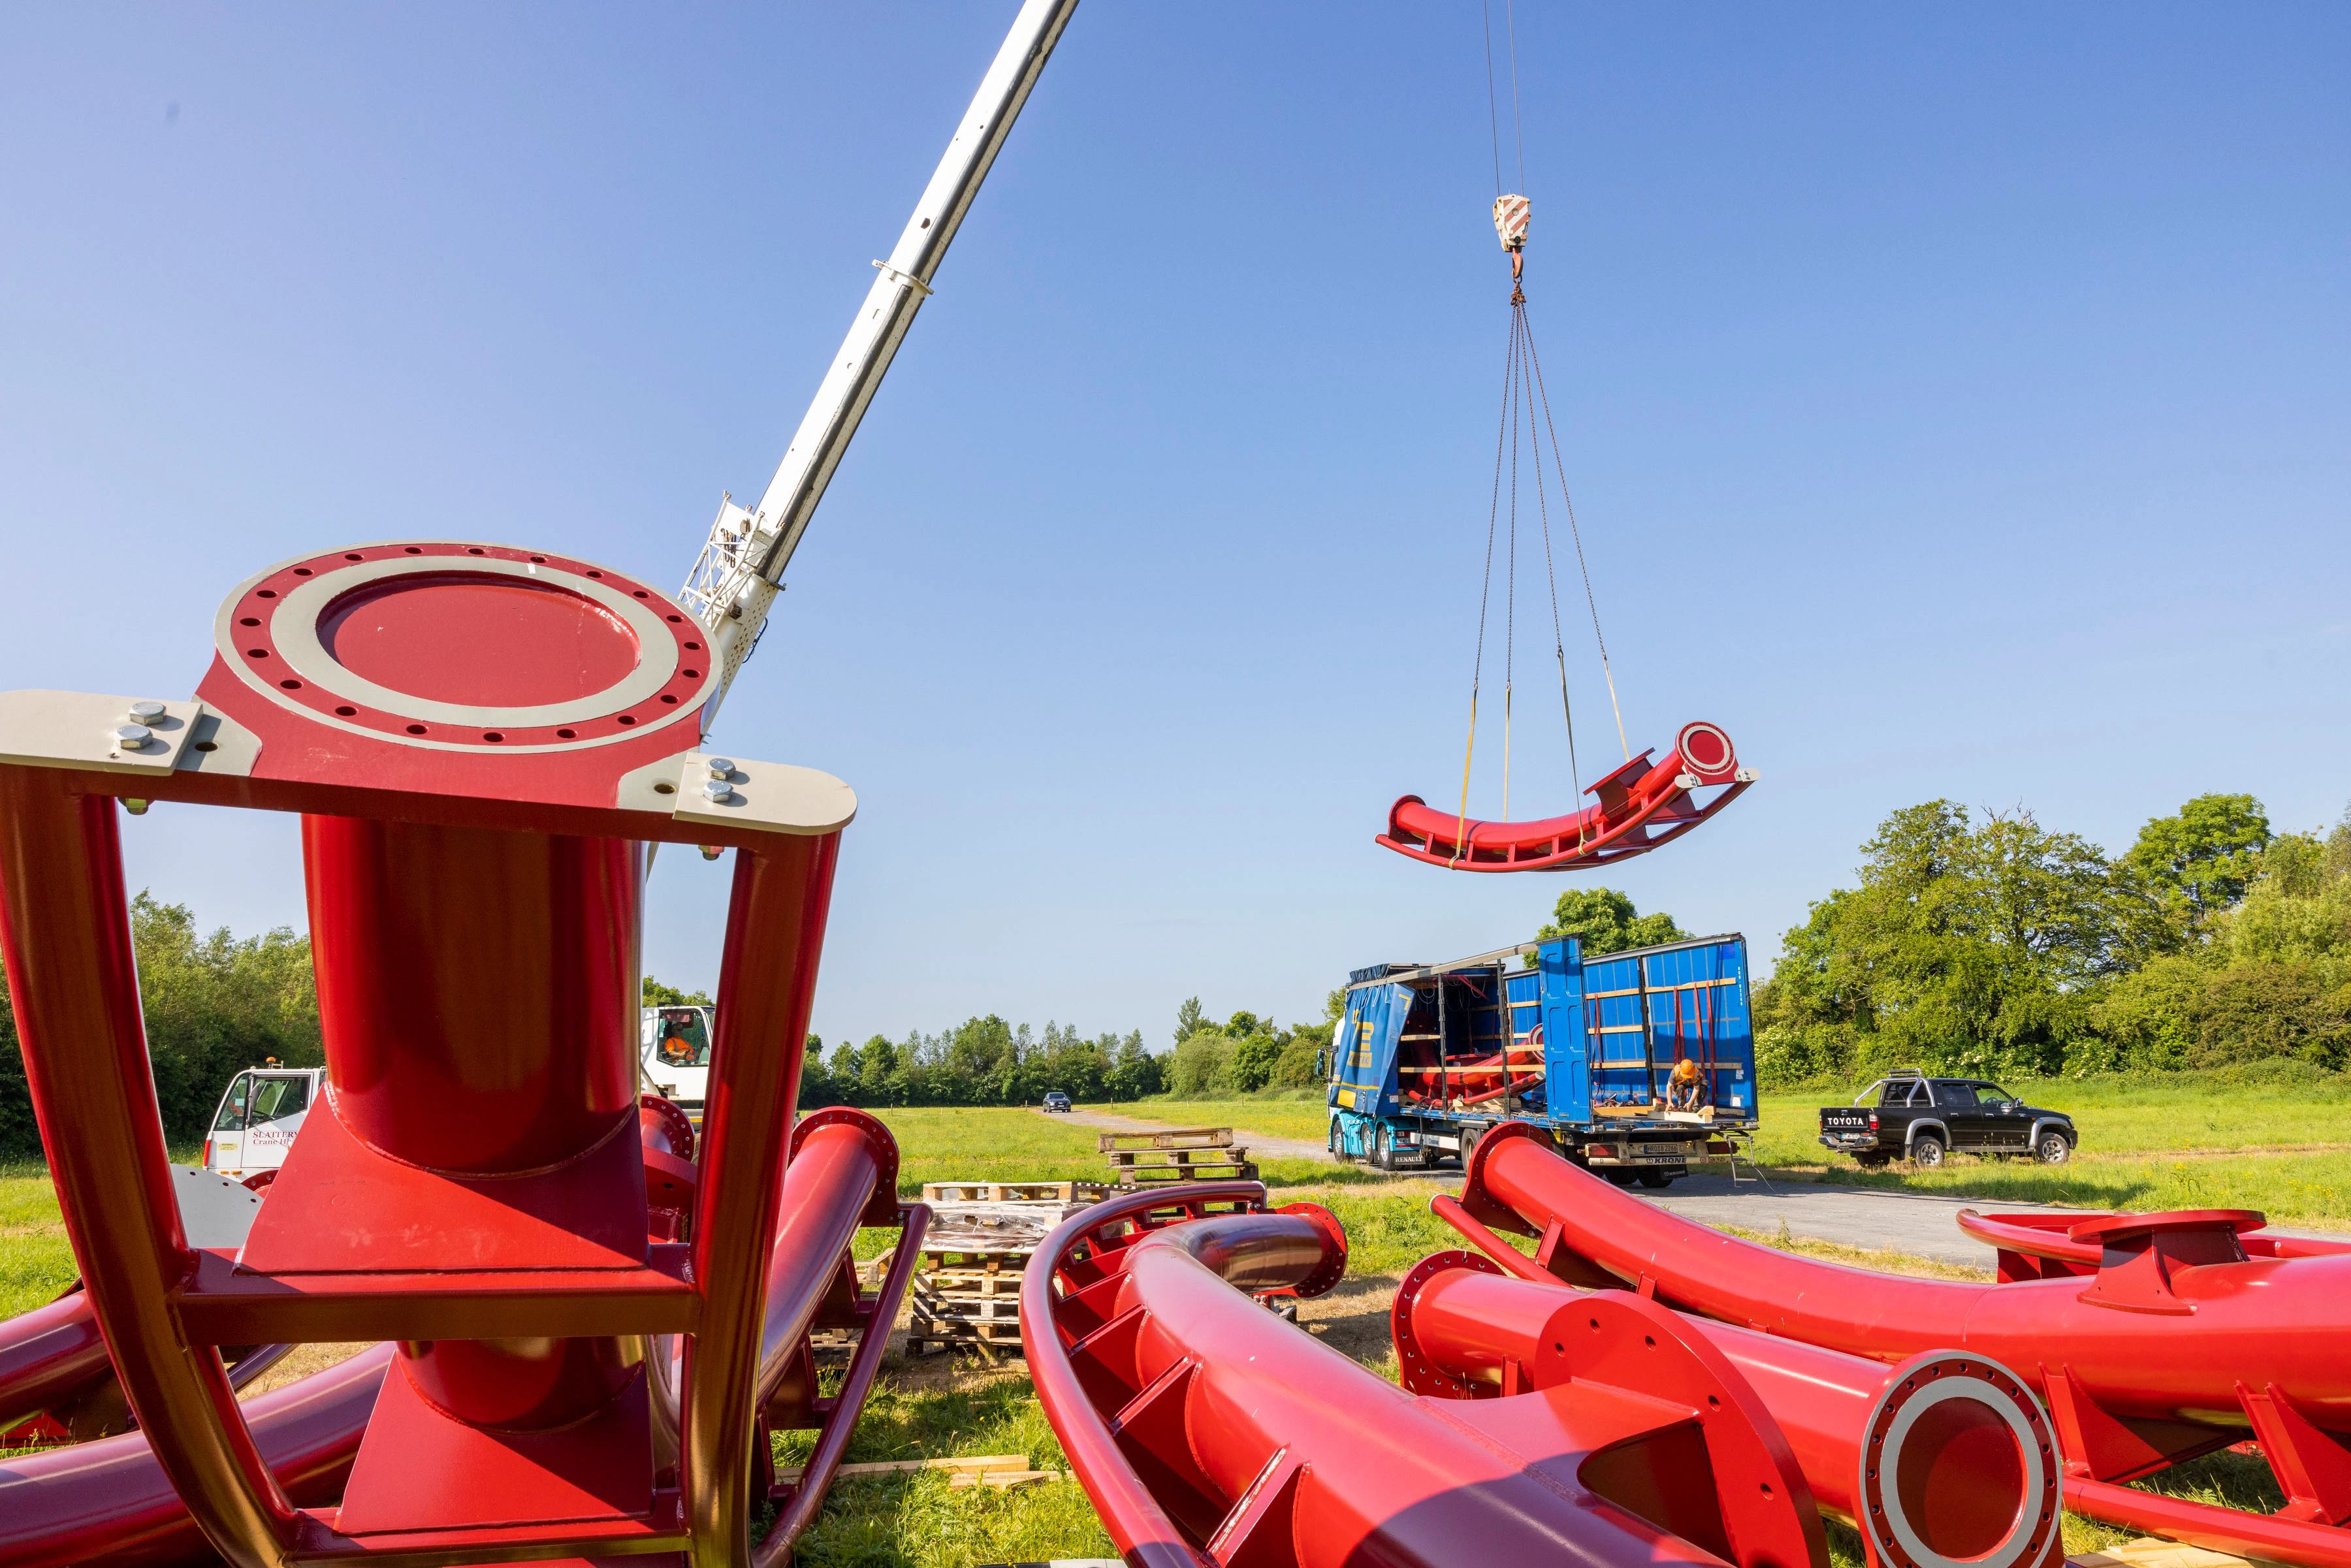 a rollercoaster track delivery of a red track. One piece is being lifted from a truck